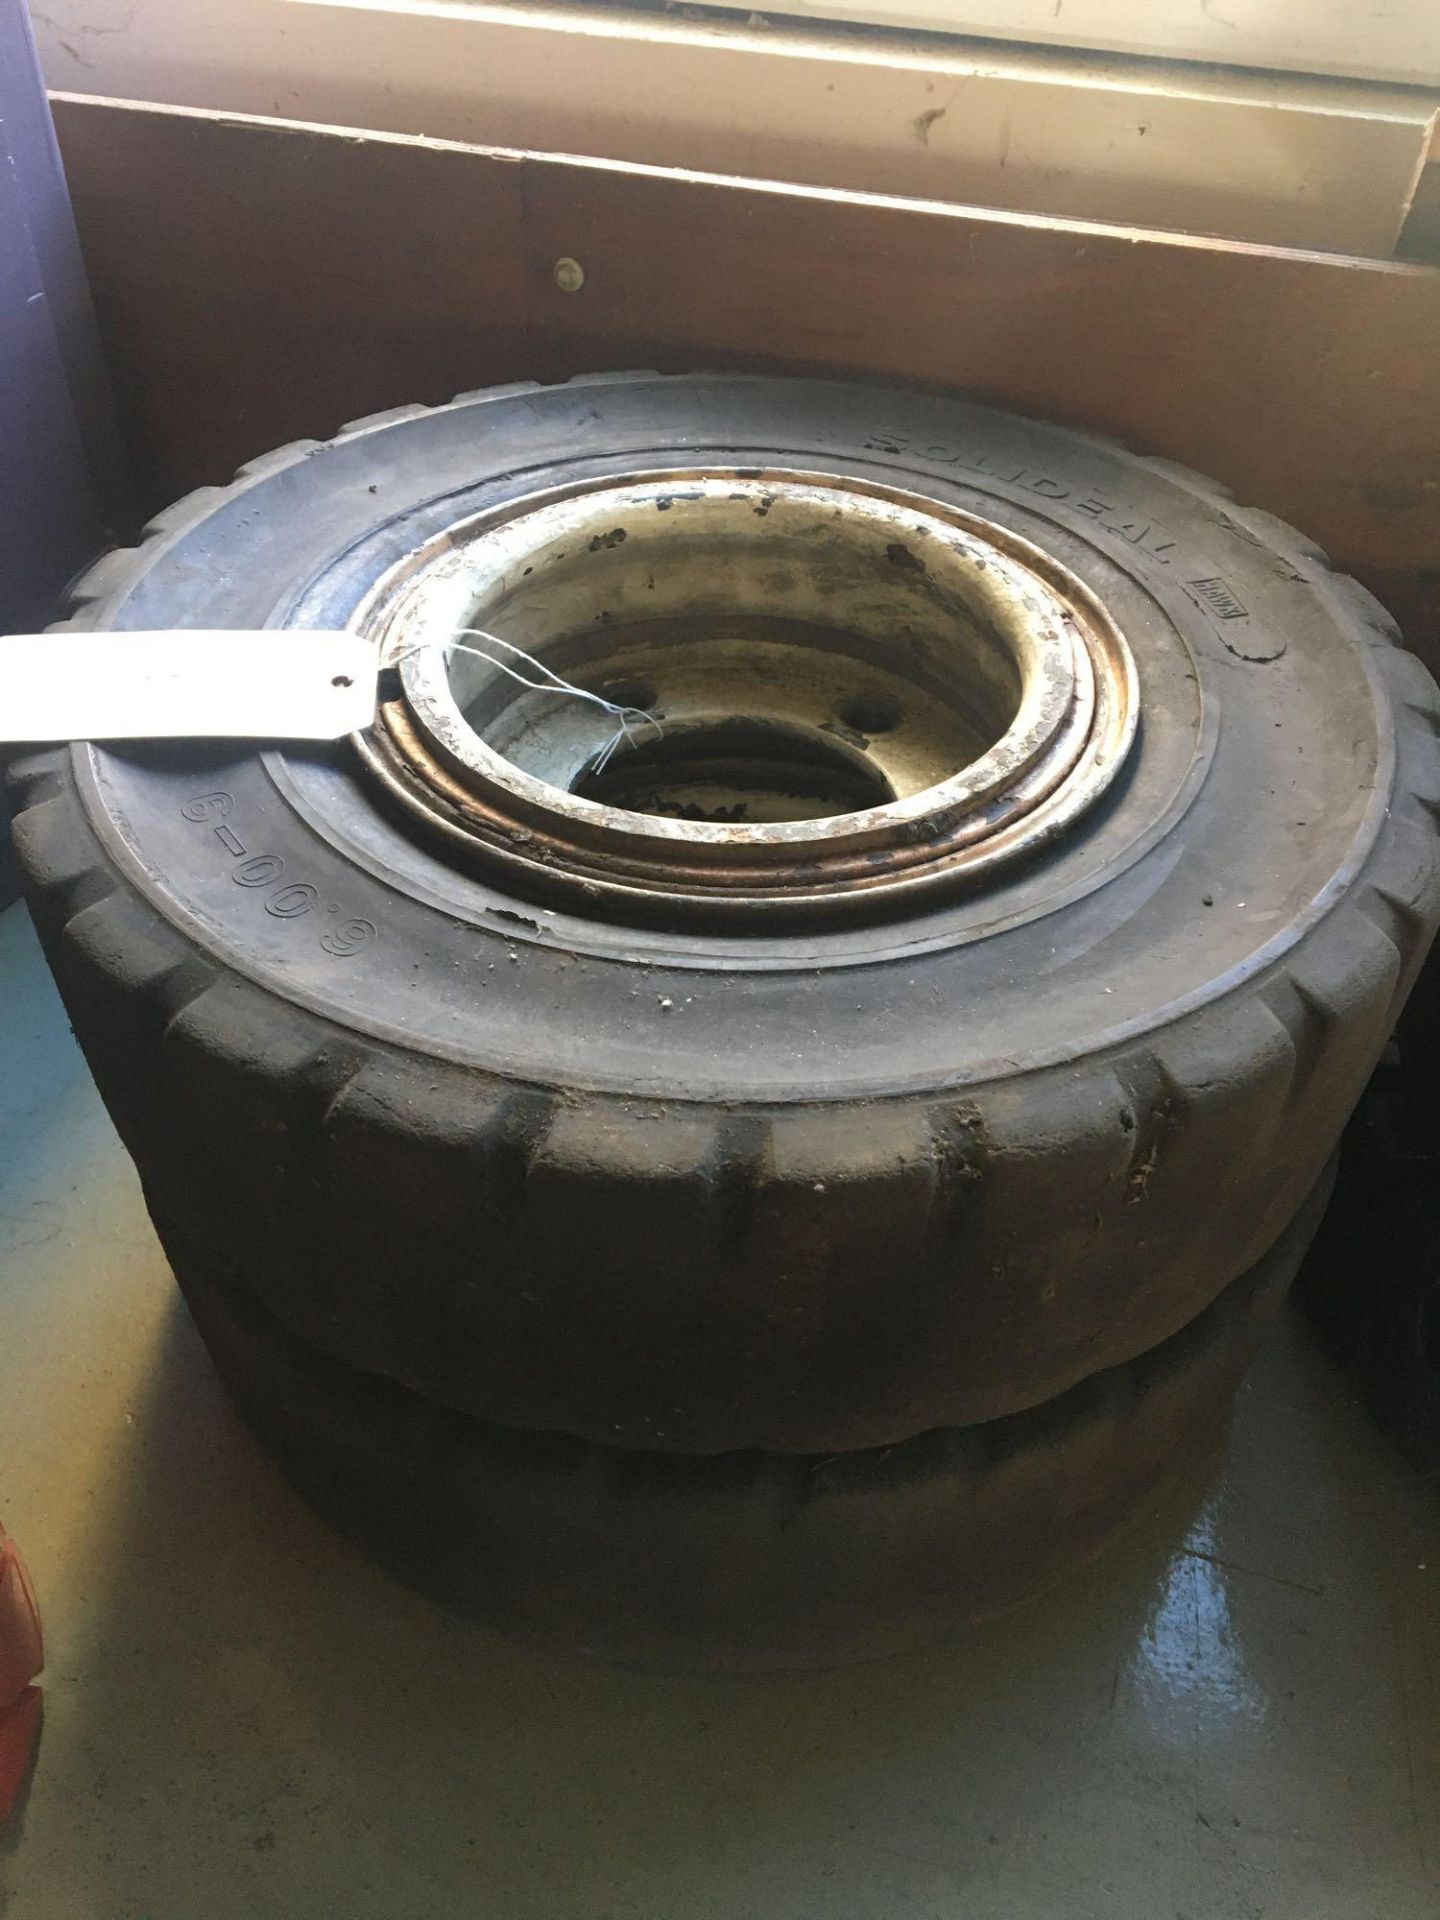 Pair of Tires: Hawk Solideal 6.00-9 with hub